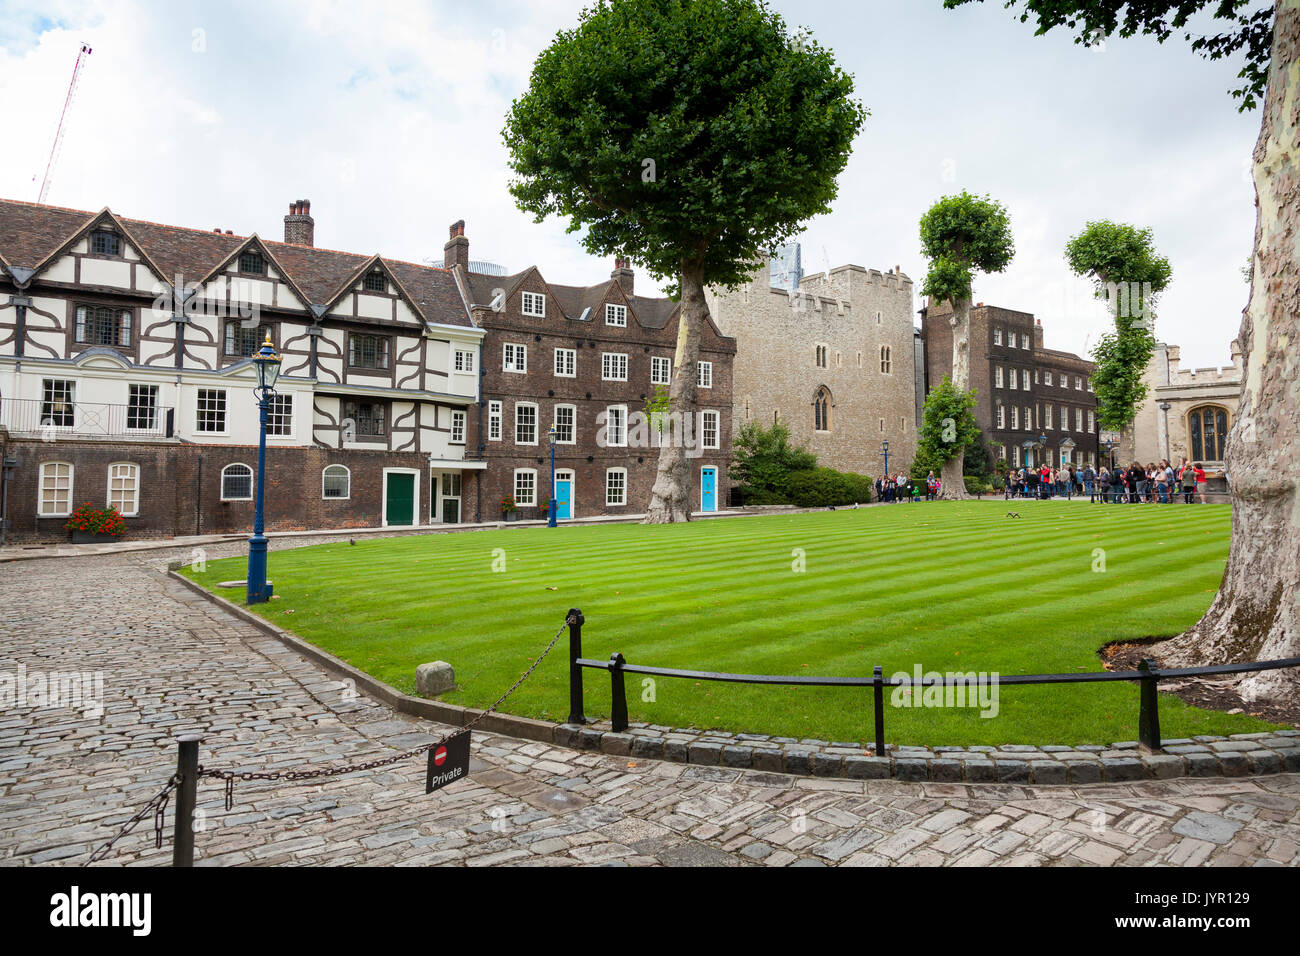 Scenes from The Tower of London, England Stock Photo